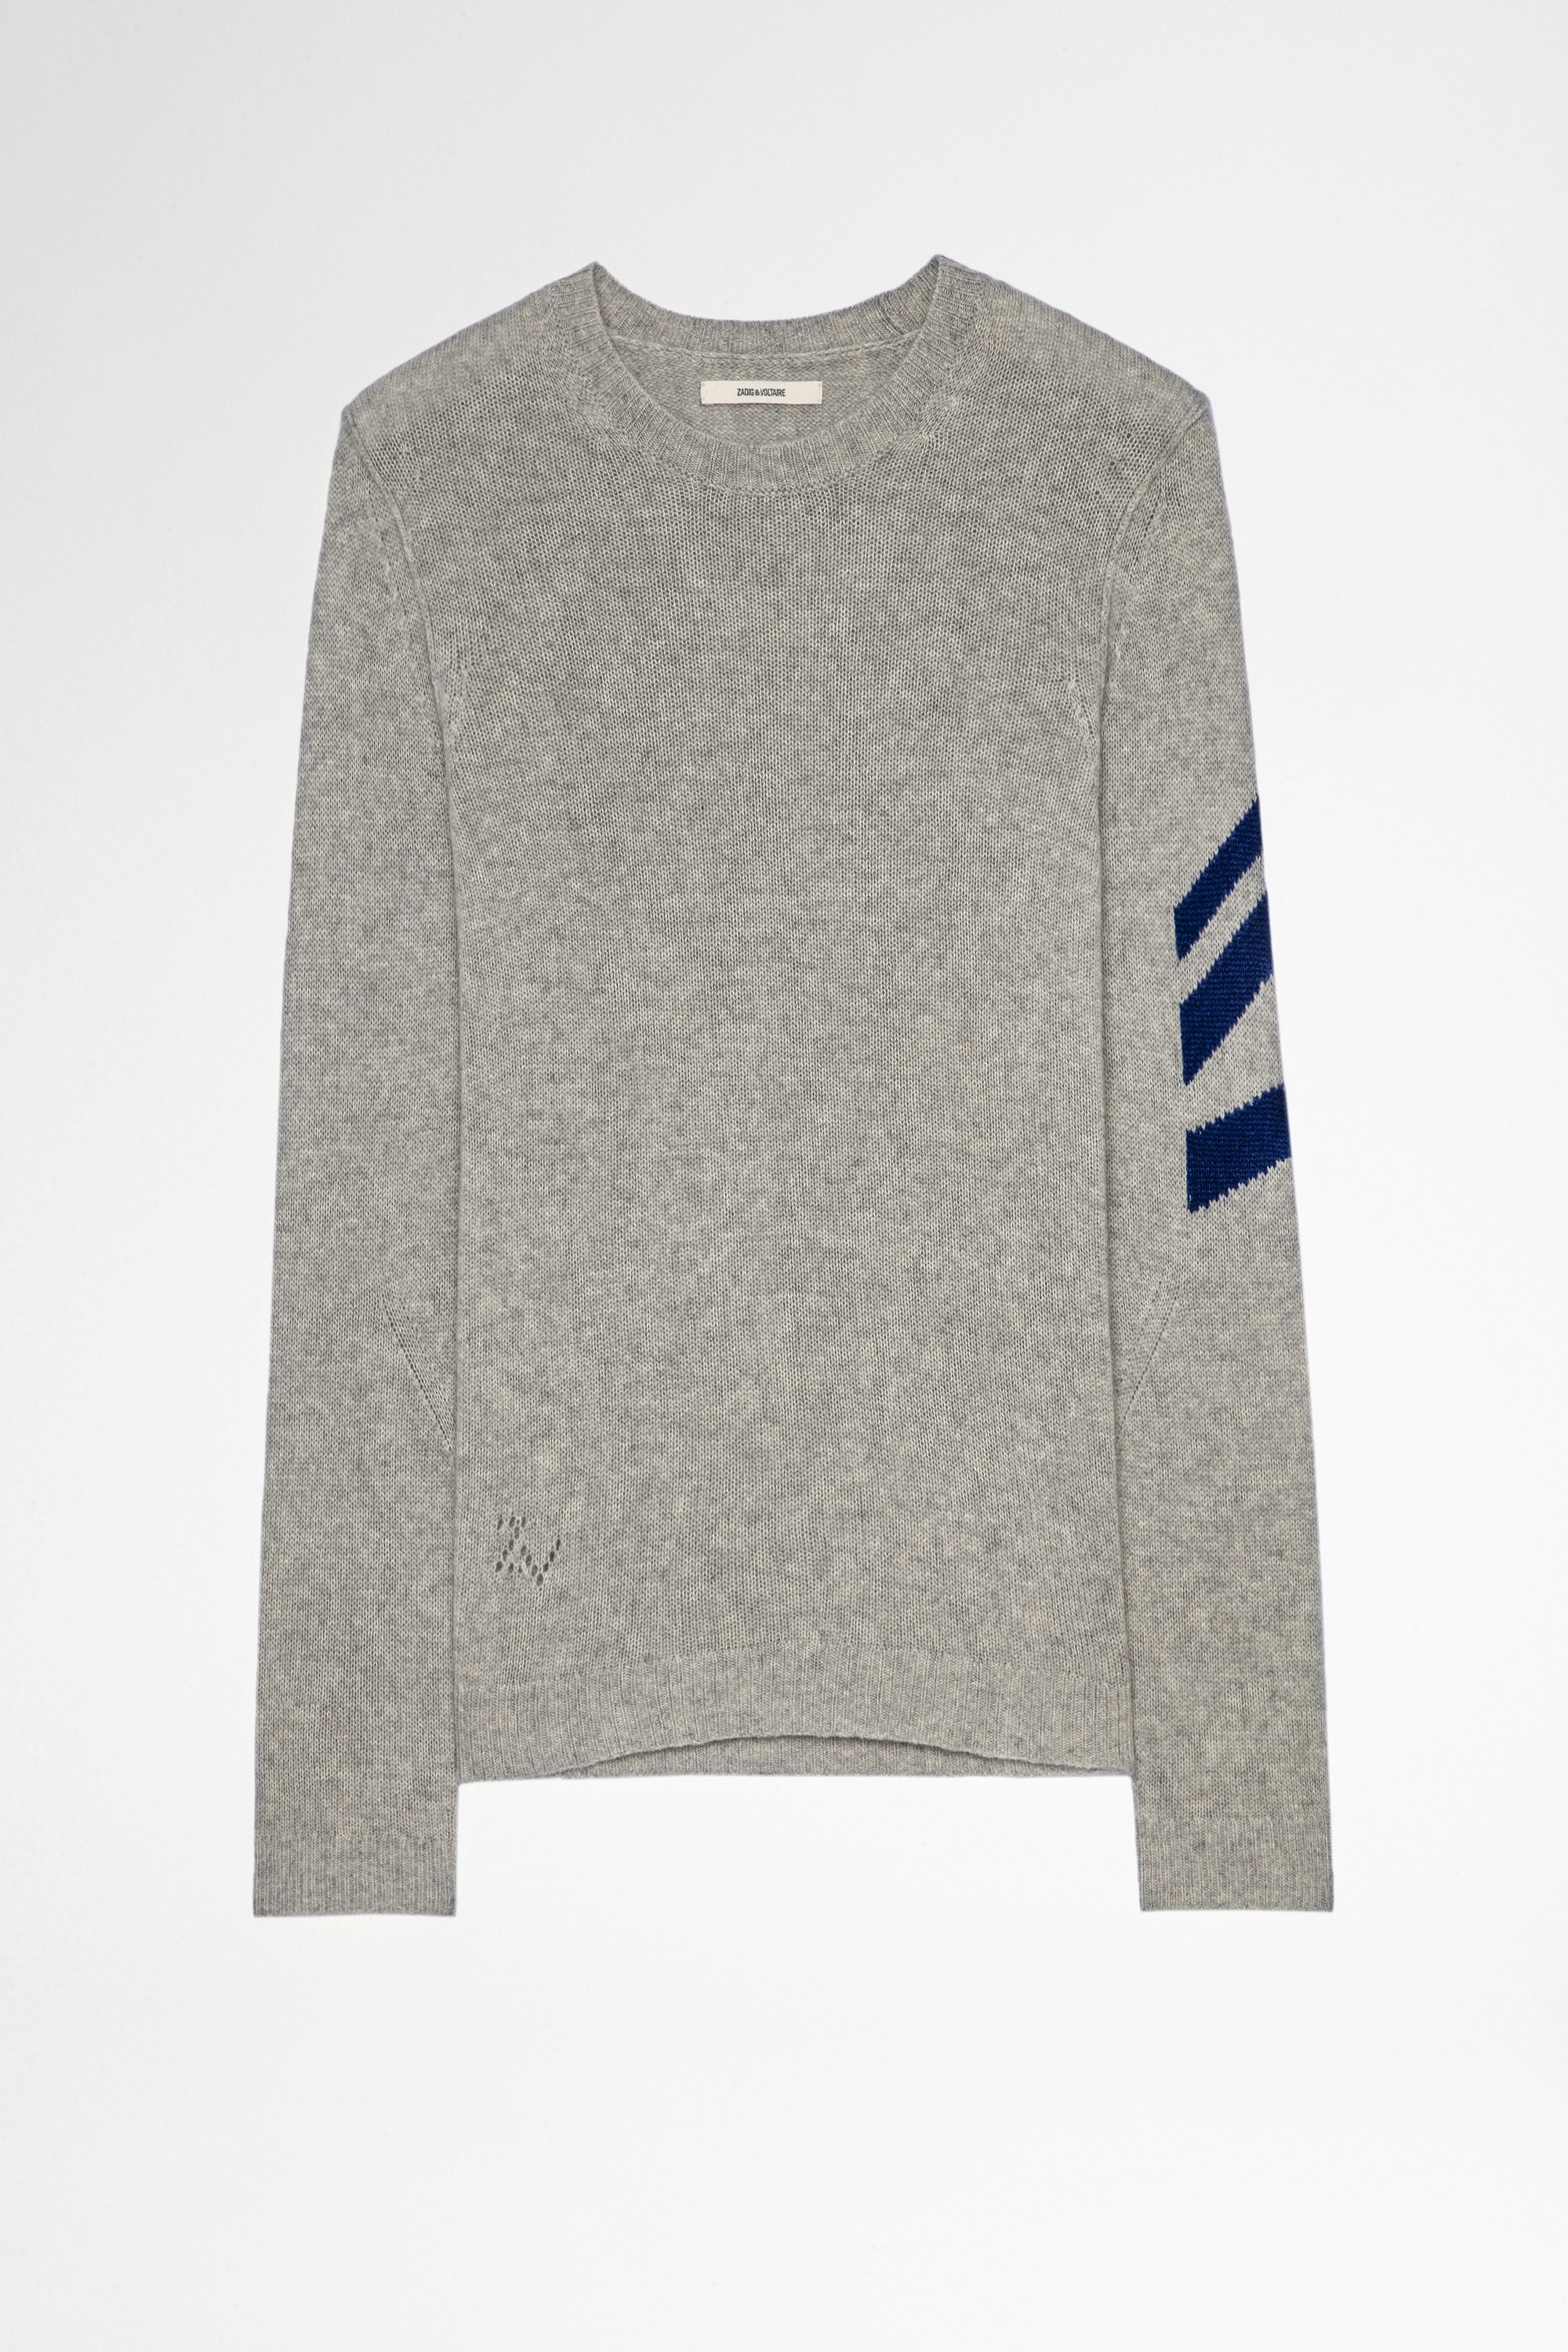 Kennedy Arrow Cashmere Jumper Men's gray cashmere sweater with arrow pattern 